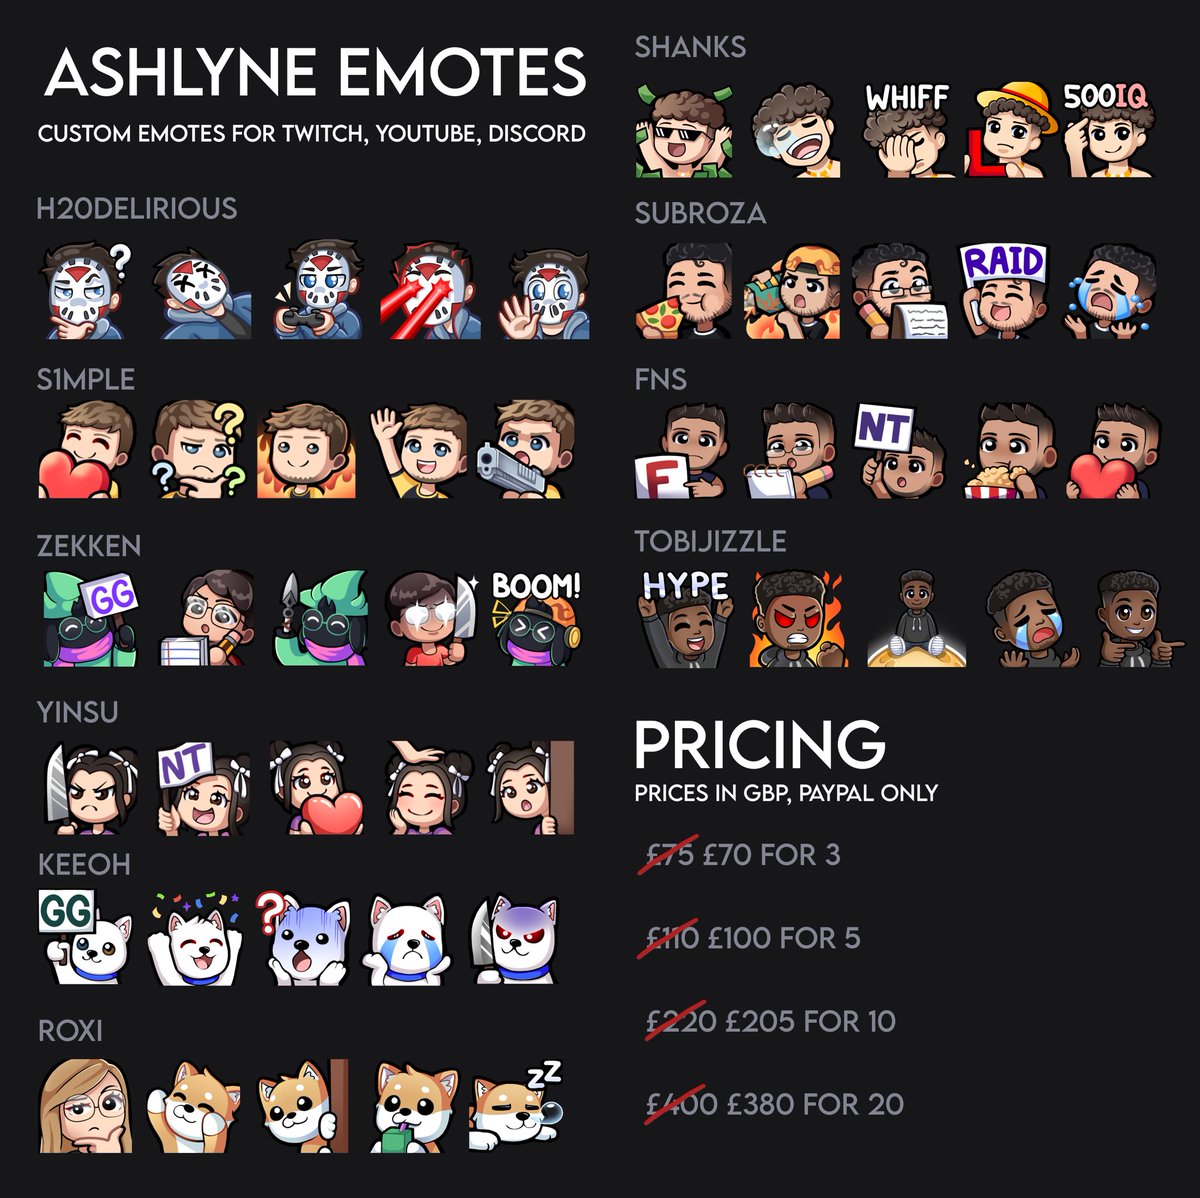 EMOTE COMMISSIONS OPEN ✧･ﾟ:* dm me to commission! rt’s appreciated. - 5 yrs experience - first come first serve slots - 1 week wait time portfolio: ashlyne.biz/emotes